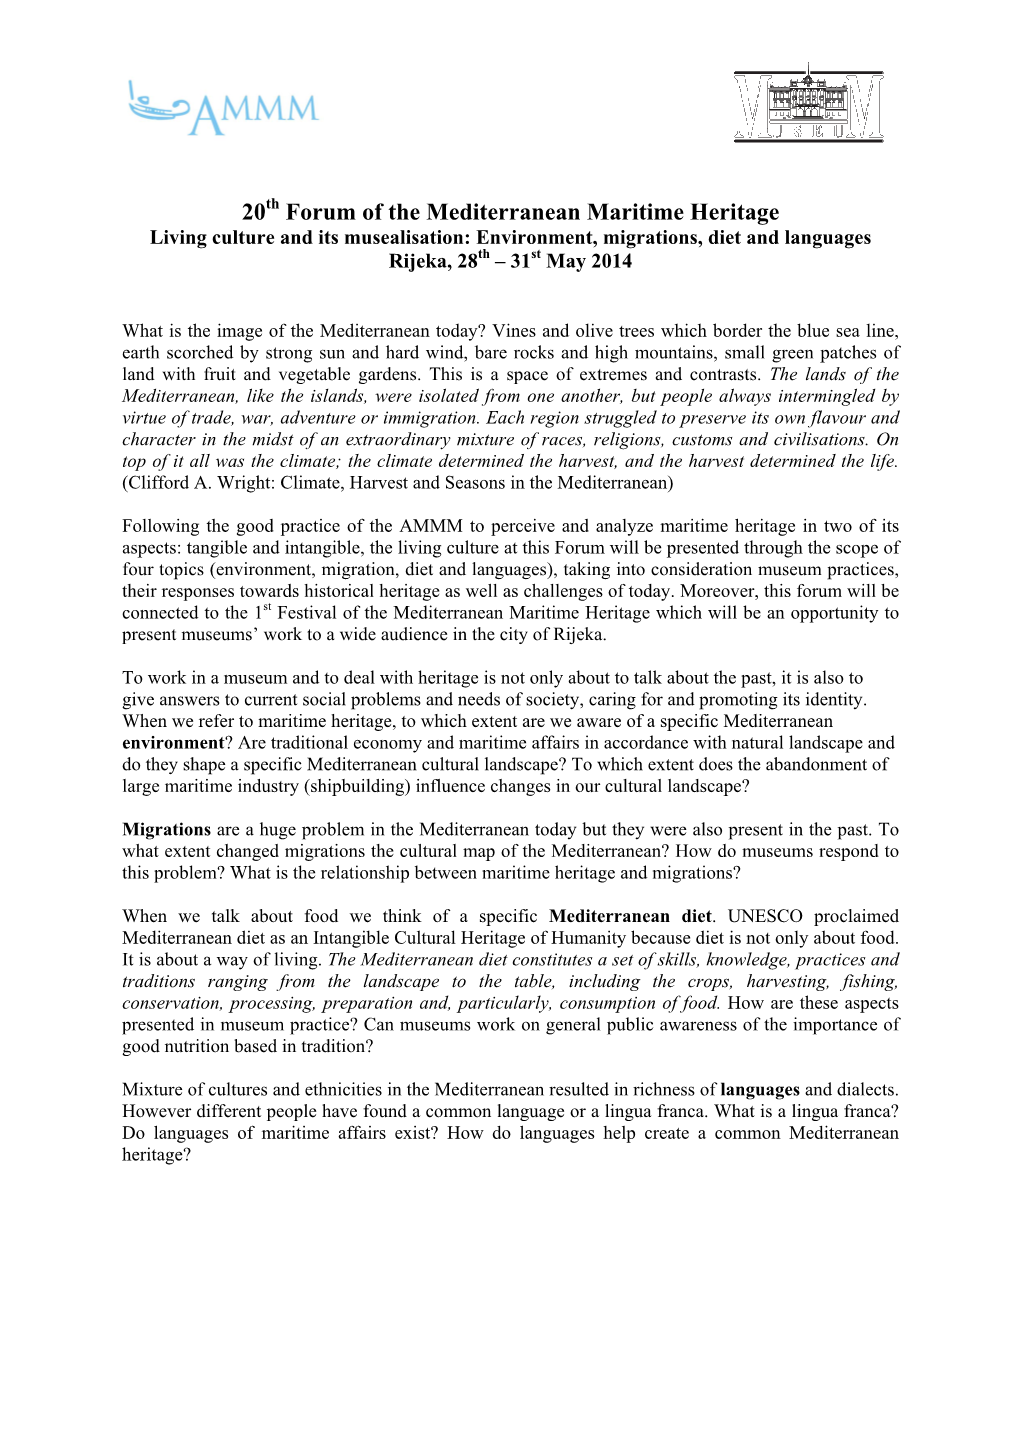 20Th Forum of the Mediterranean Maritime Heritage Living Culture and Its Musealisation: Environment, Migrations, Diet and Languages Rijeka, 28Th – 31St May 2014